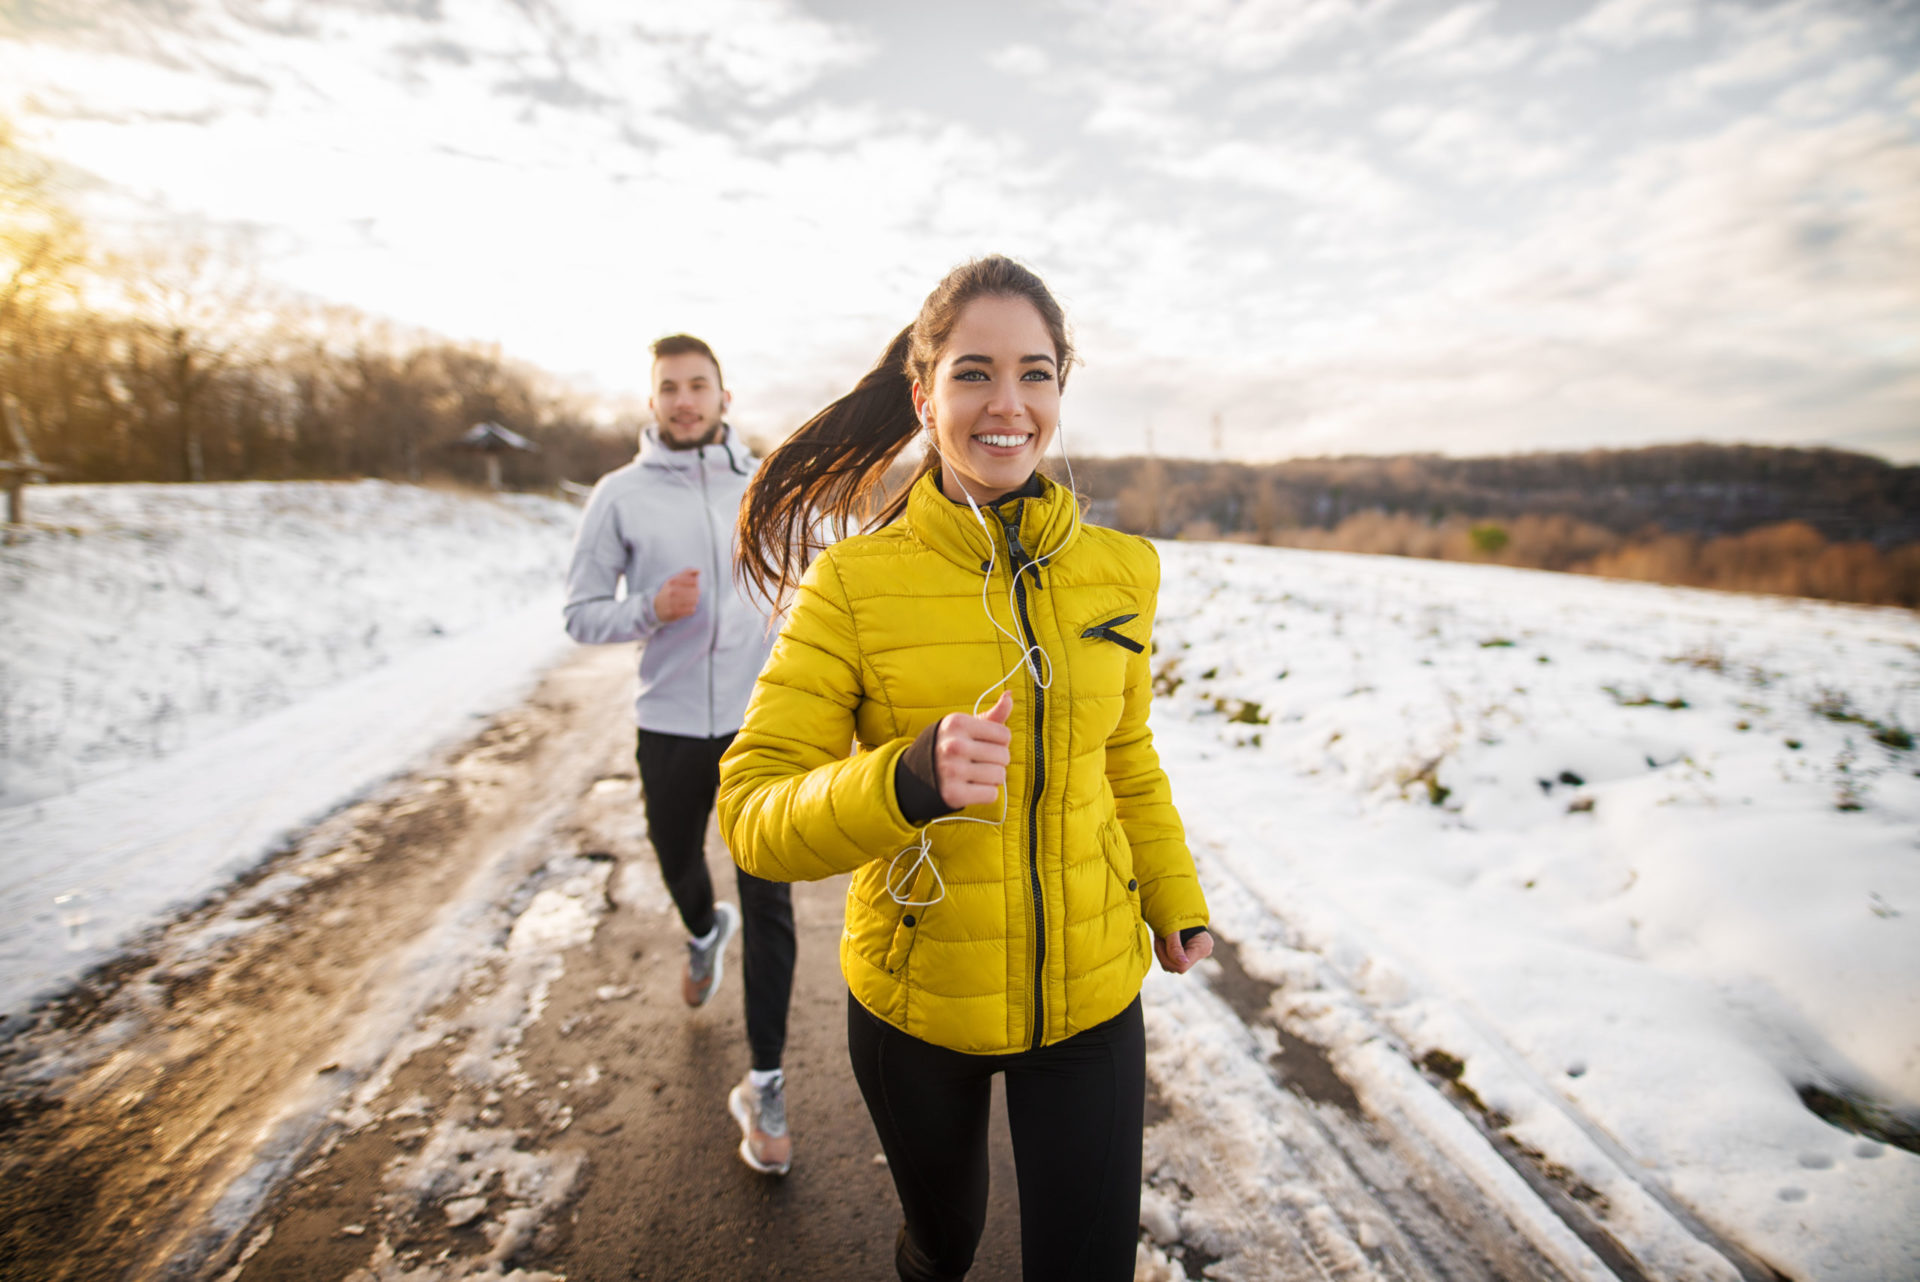 Young woman jogging in winter with young man following behind her